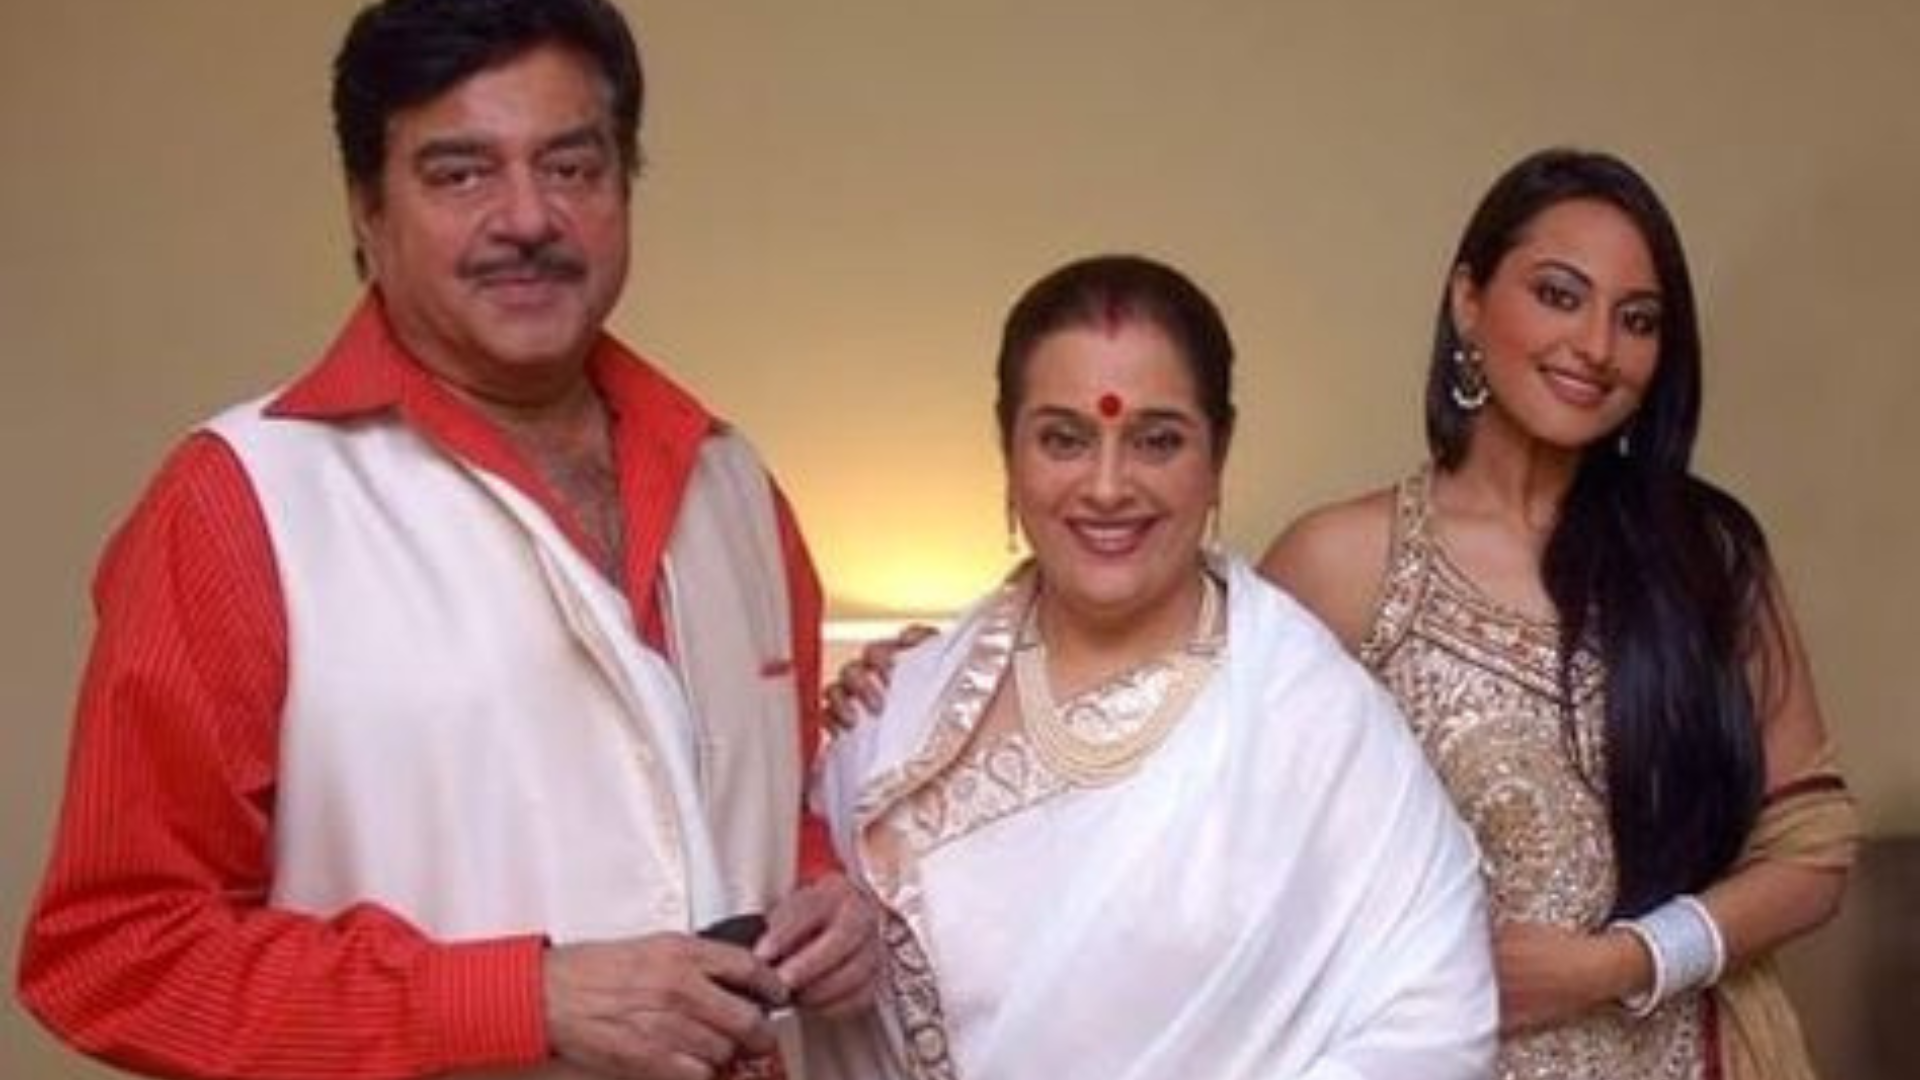 Sonakshi Sinha And Zaheer Iqbal Wedding: Shatrughan Sinha Calls Out The Rumours, 'I Will Be There'